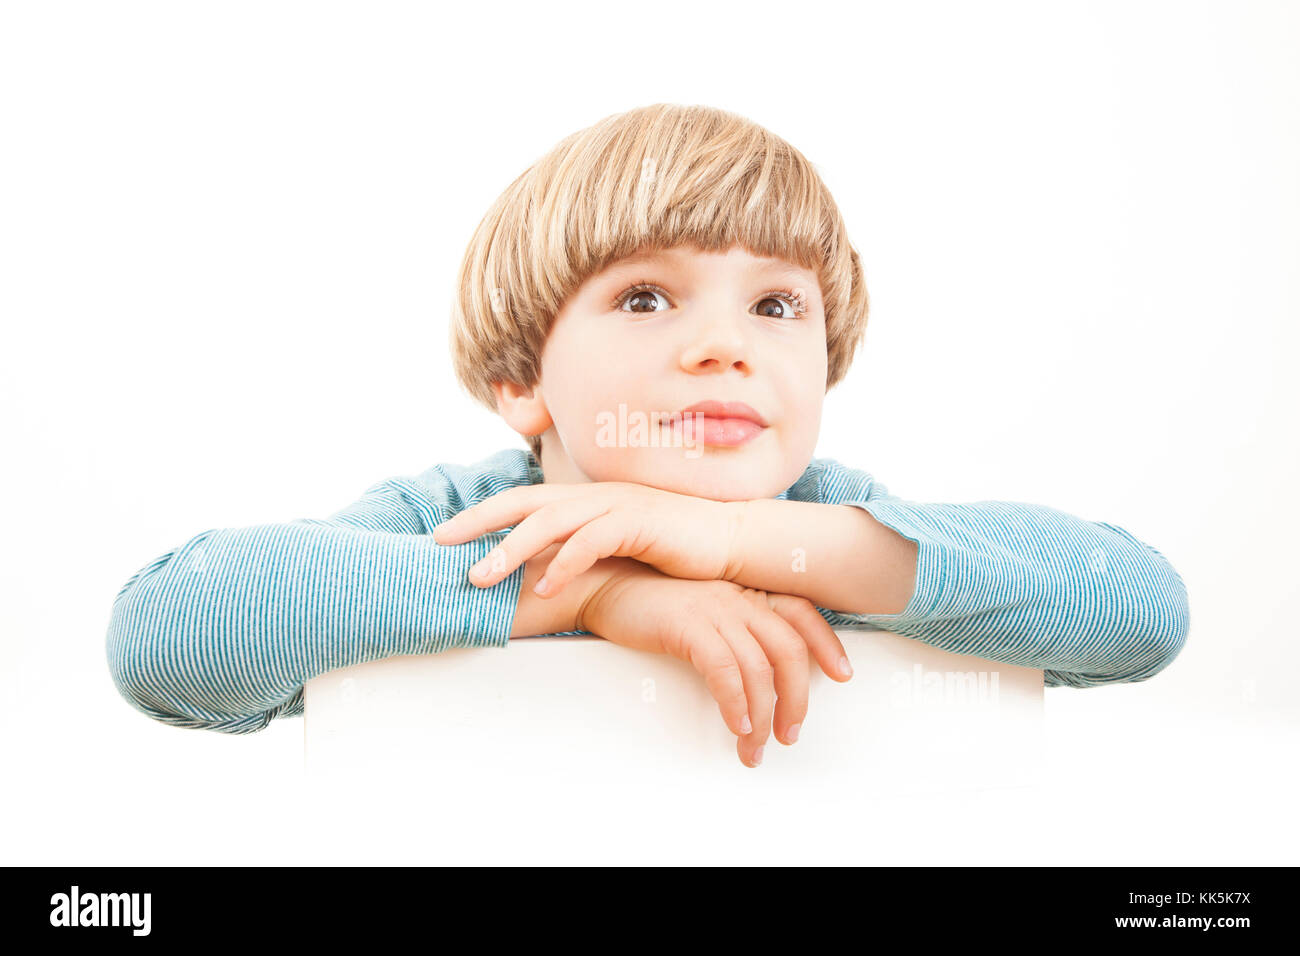 Imaginative and  curious boy - Thoughtful dreamer – Daydreaming - Looking up on white background – Isolated portrait Stock Photo